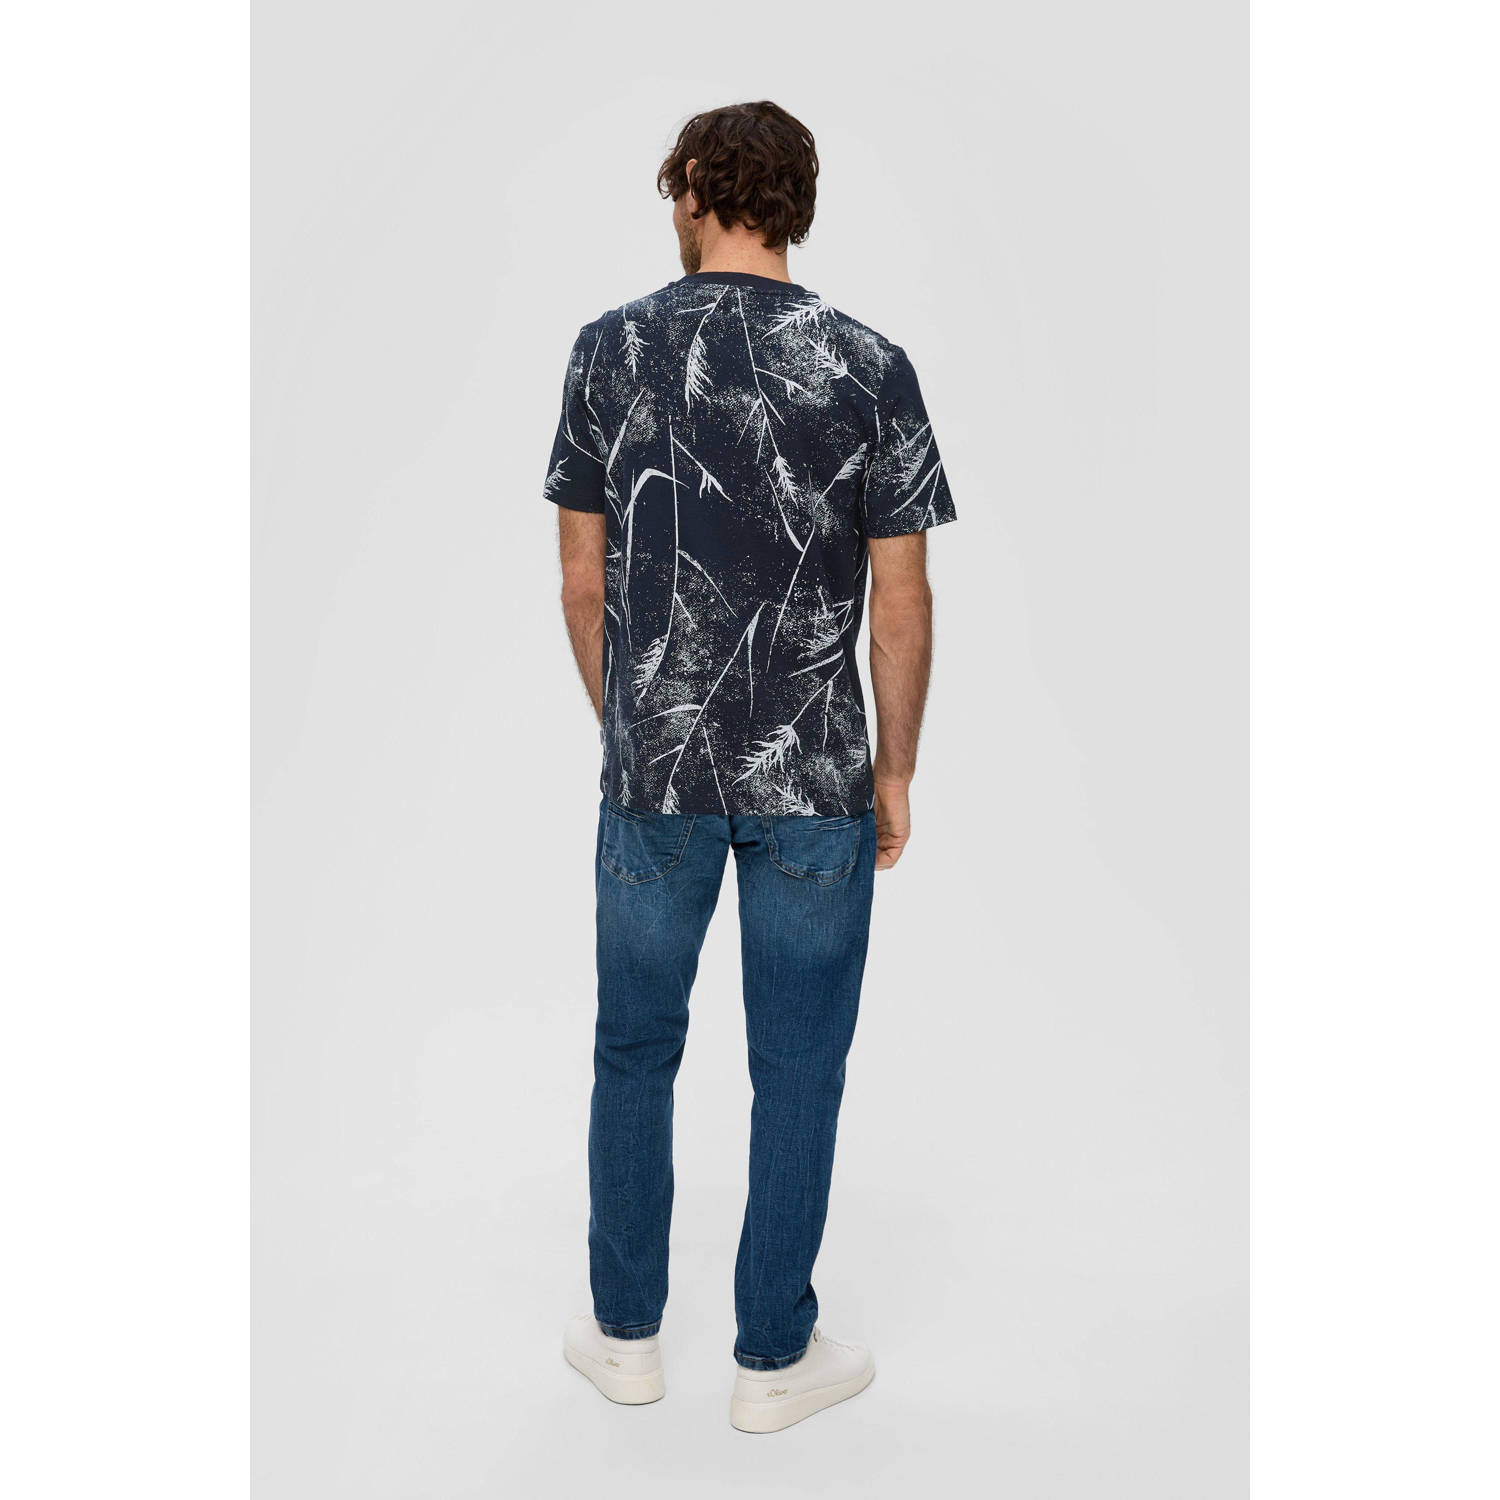 s.Oliver T-shirt met all over print marine